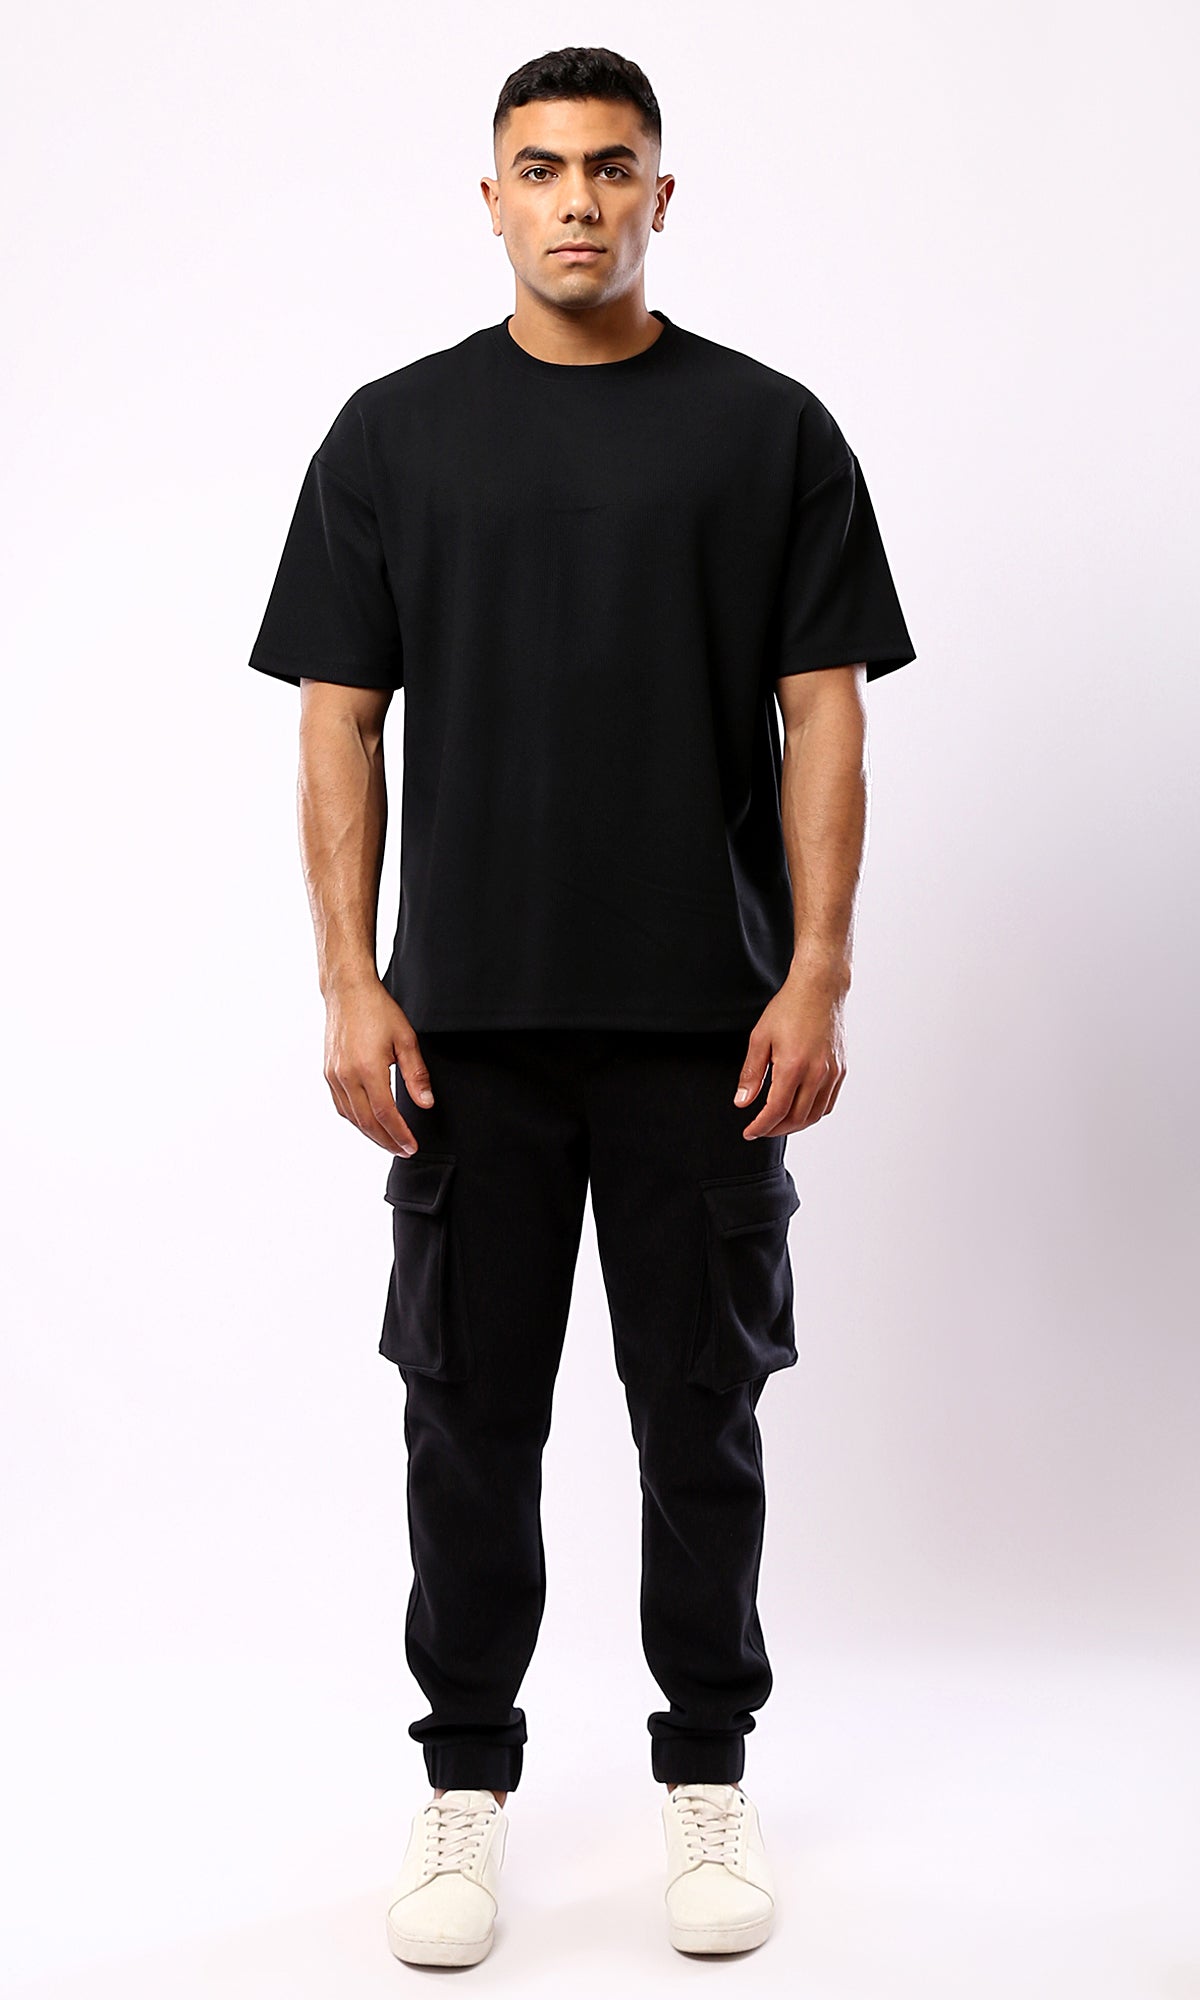 O182737 Relaxed Fit Black Tee With Elbow Sleeves